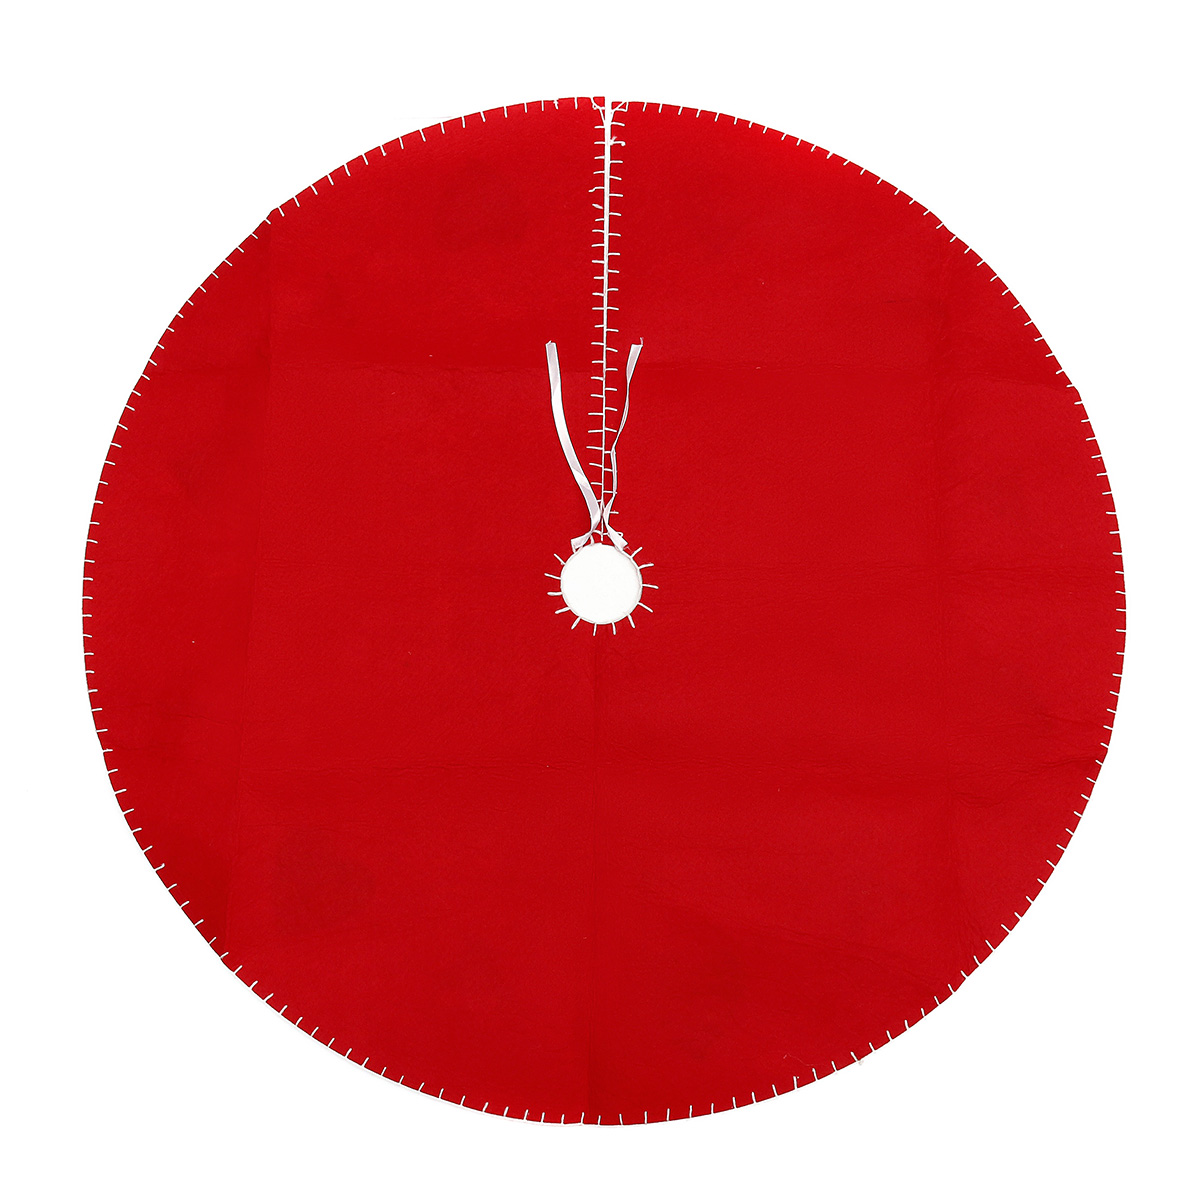 100cm-Red-Christmas-Tree-Skirt-Carpet-Party-Gift-Decor-Pad-Ornaments-Round-Mat-1376090-5